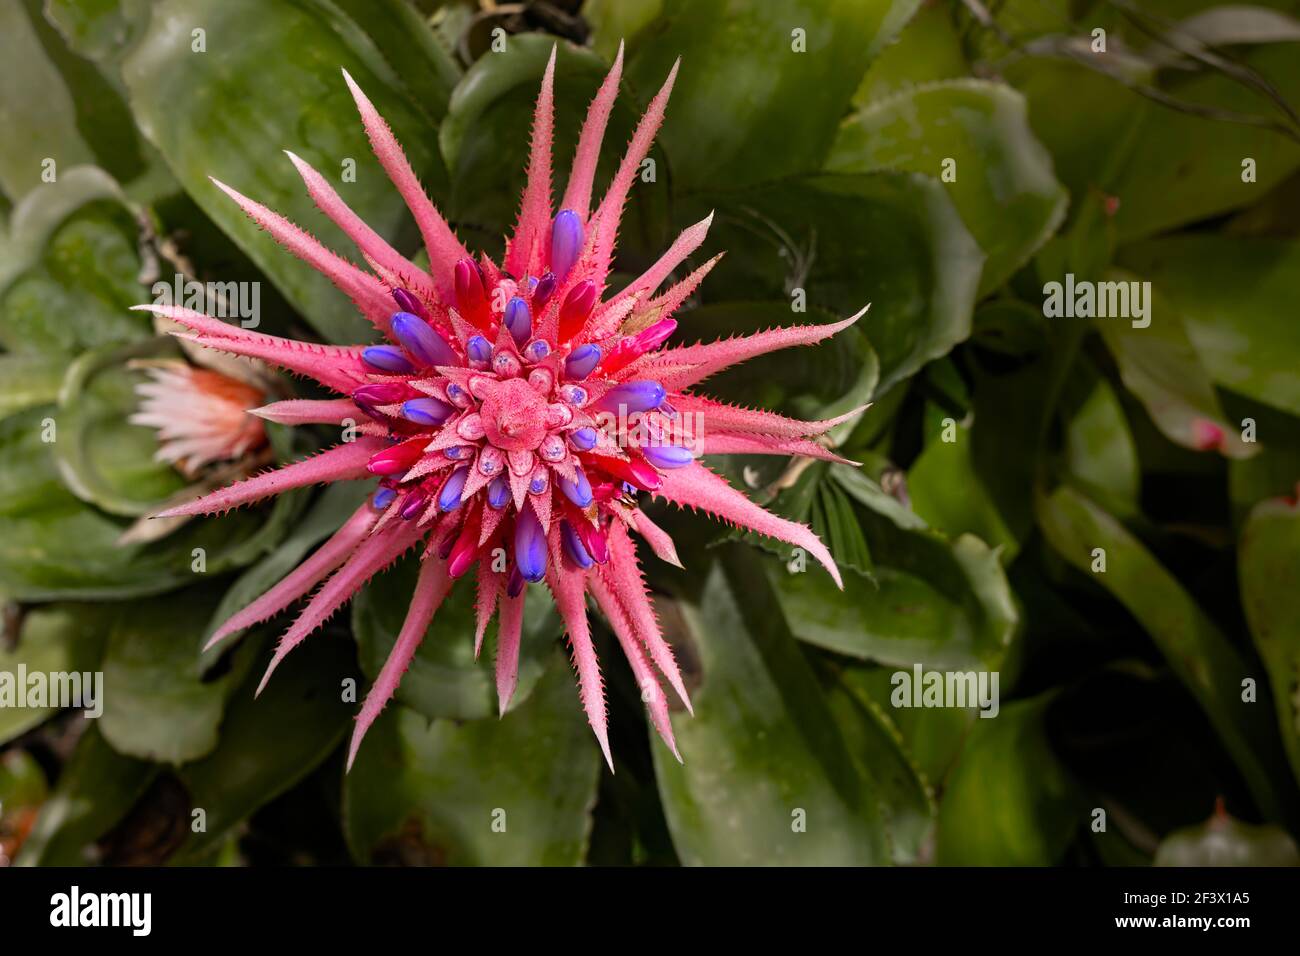 Beautiful pink aechmea fasciata bromeliad flower also known as the silver urn plant top view showing its star shape and pink bacts with blue flowers. Stock Photo